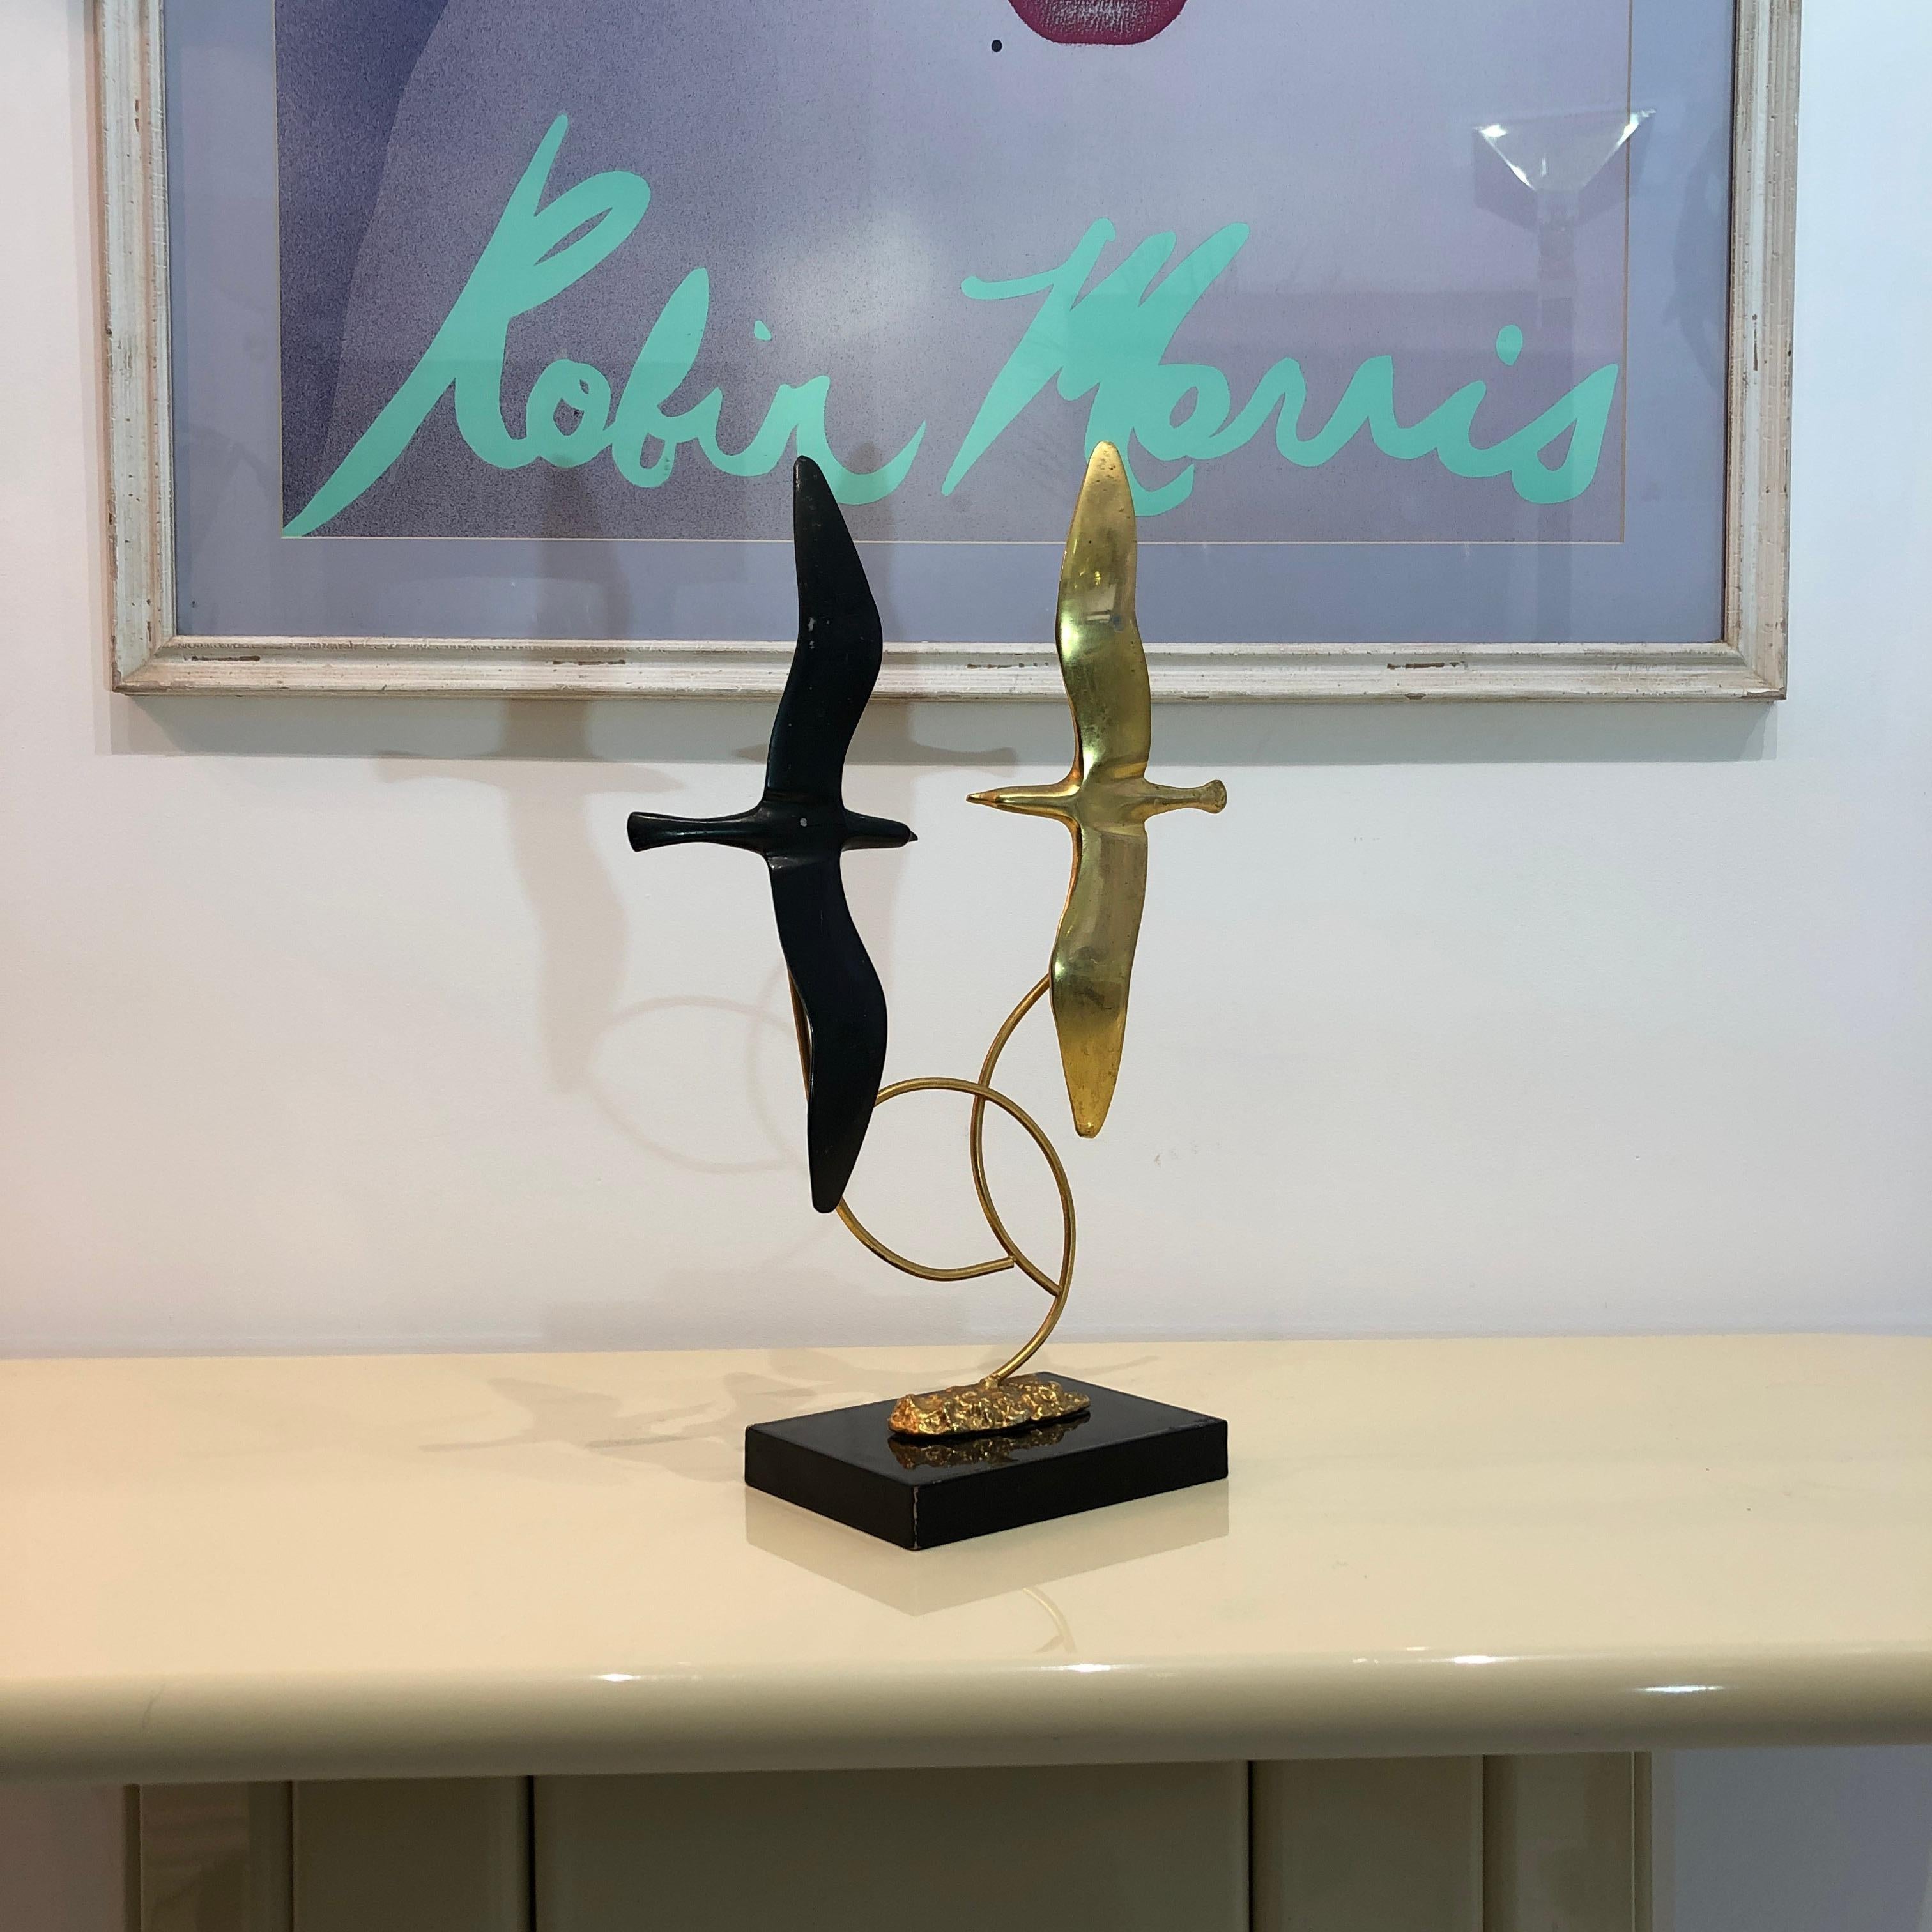 A simple and elegant figurative brass sculpture of two flying birds, one composed of polished brass and one of patinated brass. The swirly brass supports give this piece an undulating and organic kinetic effect of two birds in flight. A black,